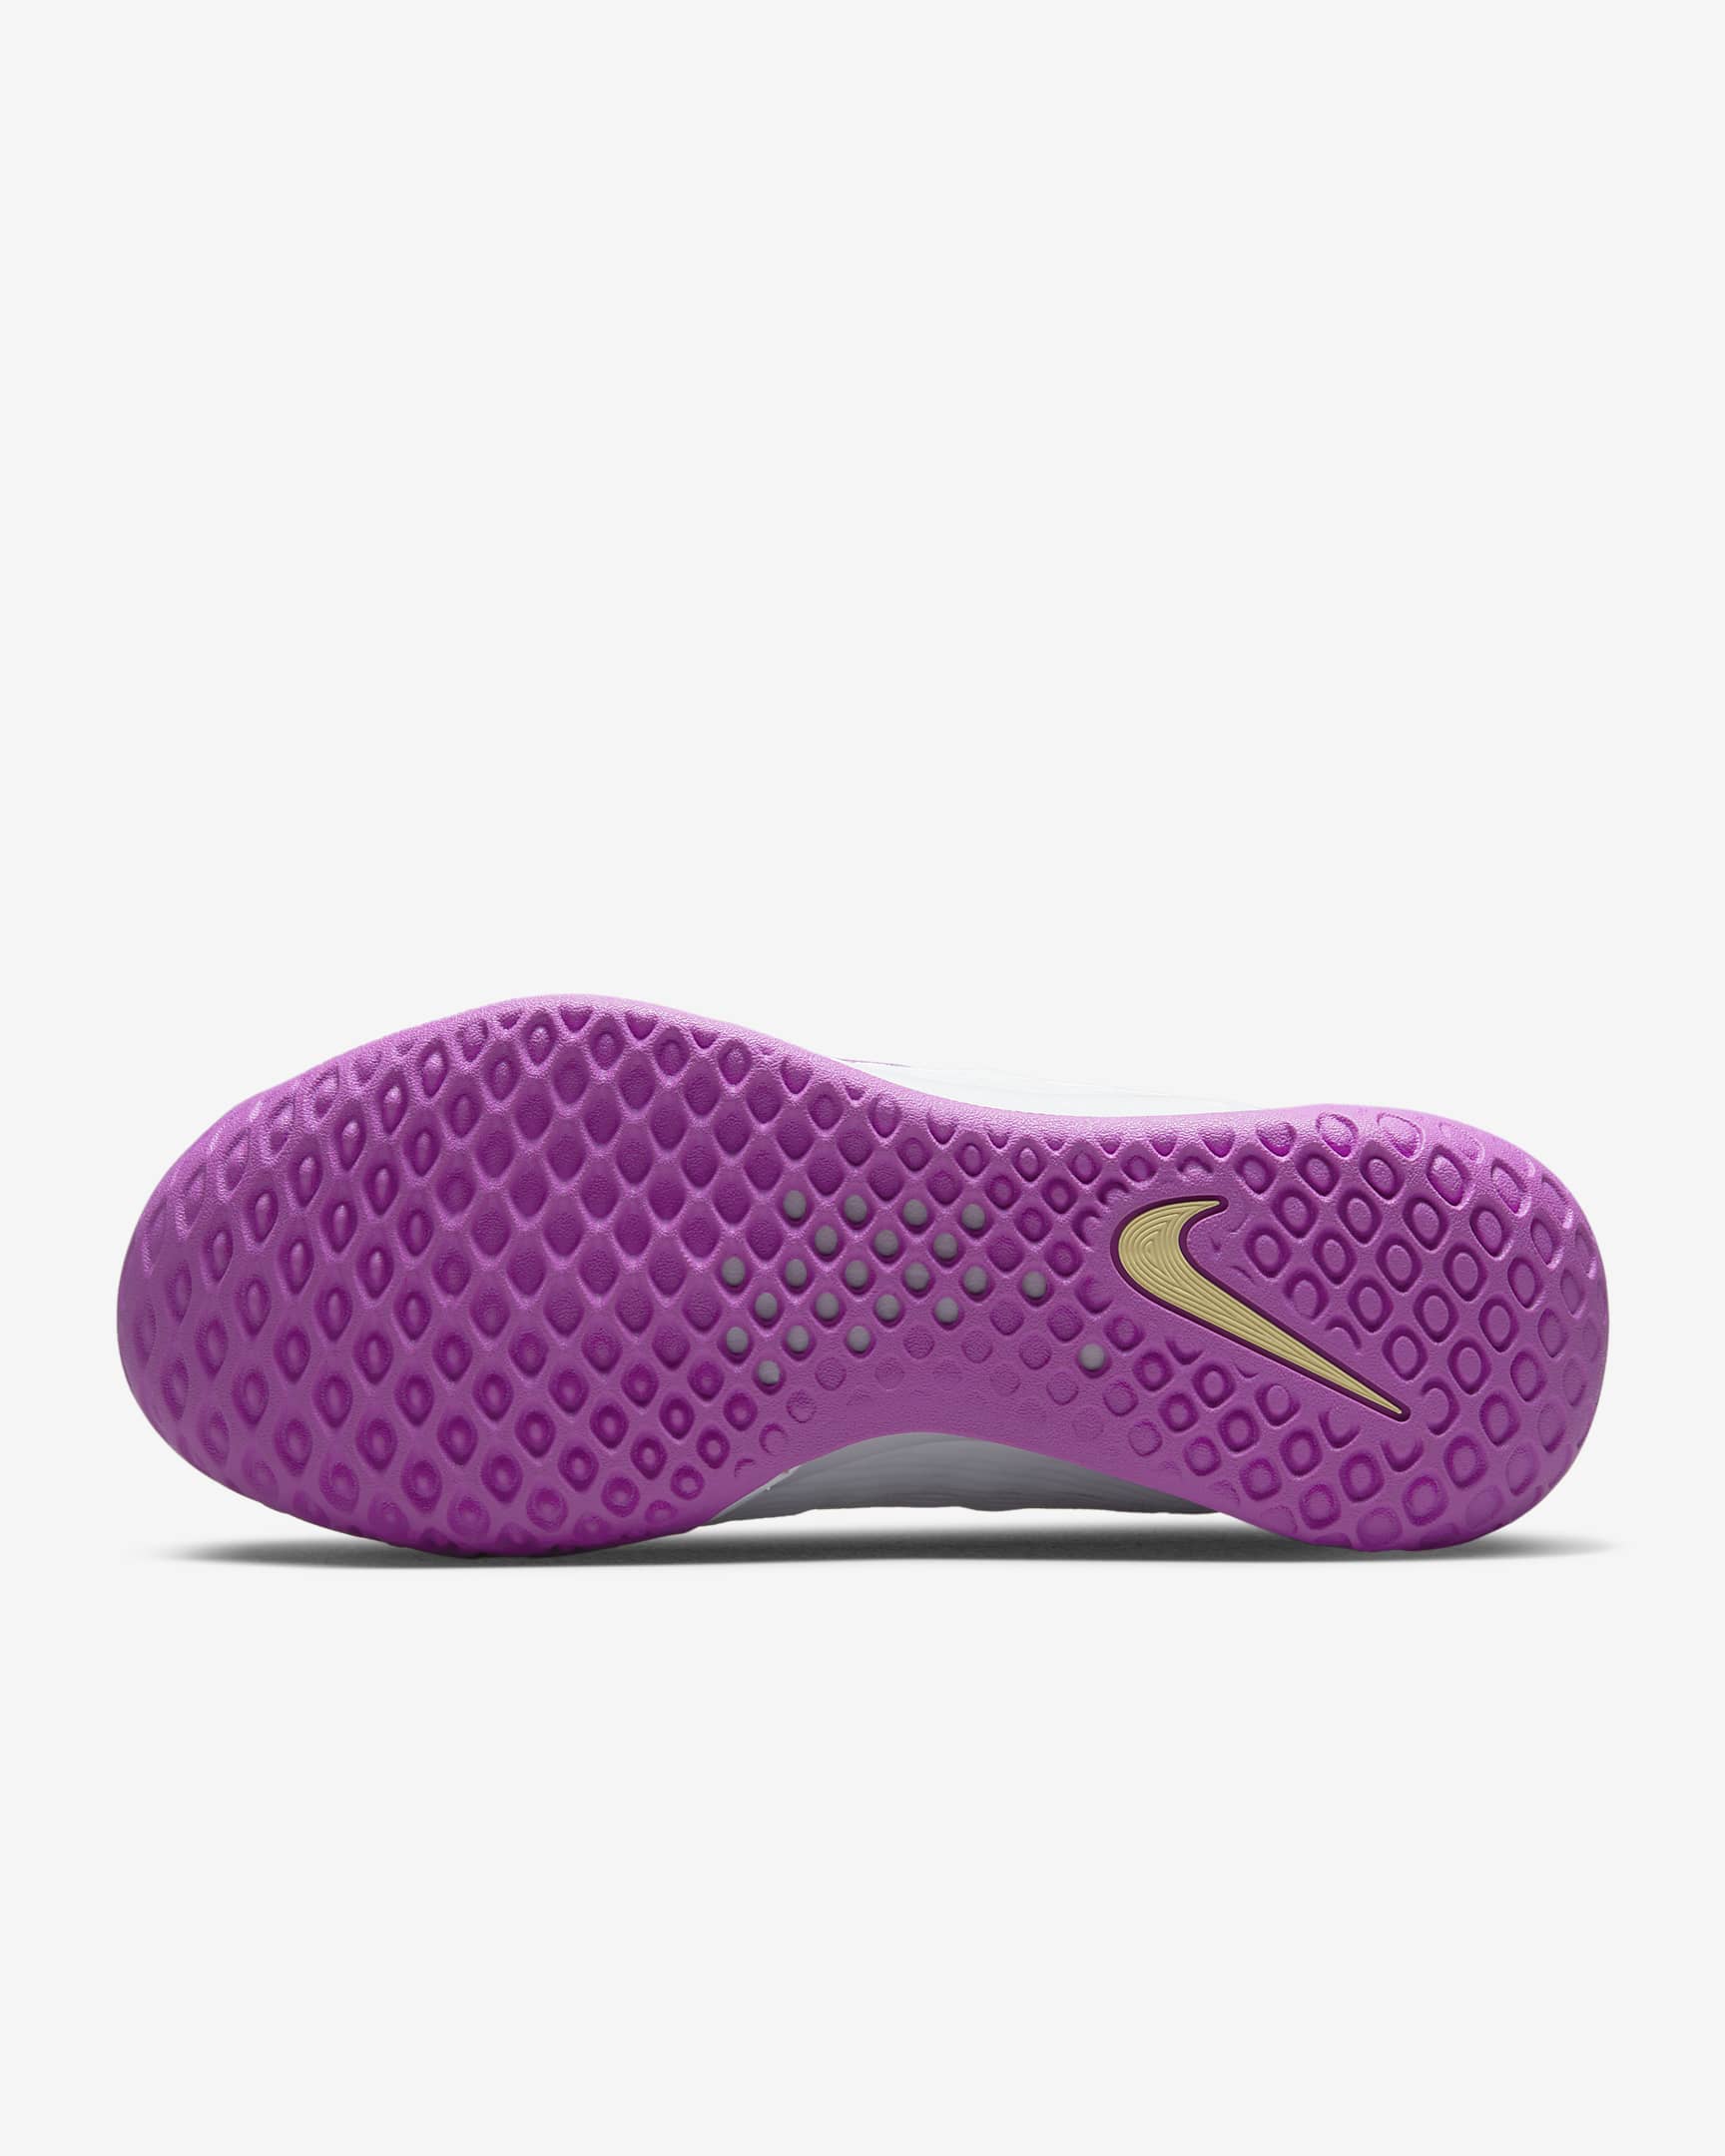 nikecourt-air-zoom-nxt-hard-court-tennis-shoes-0pFSks.png